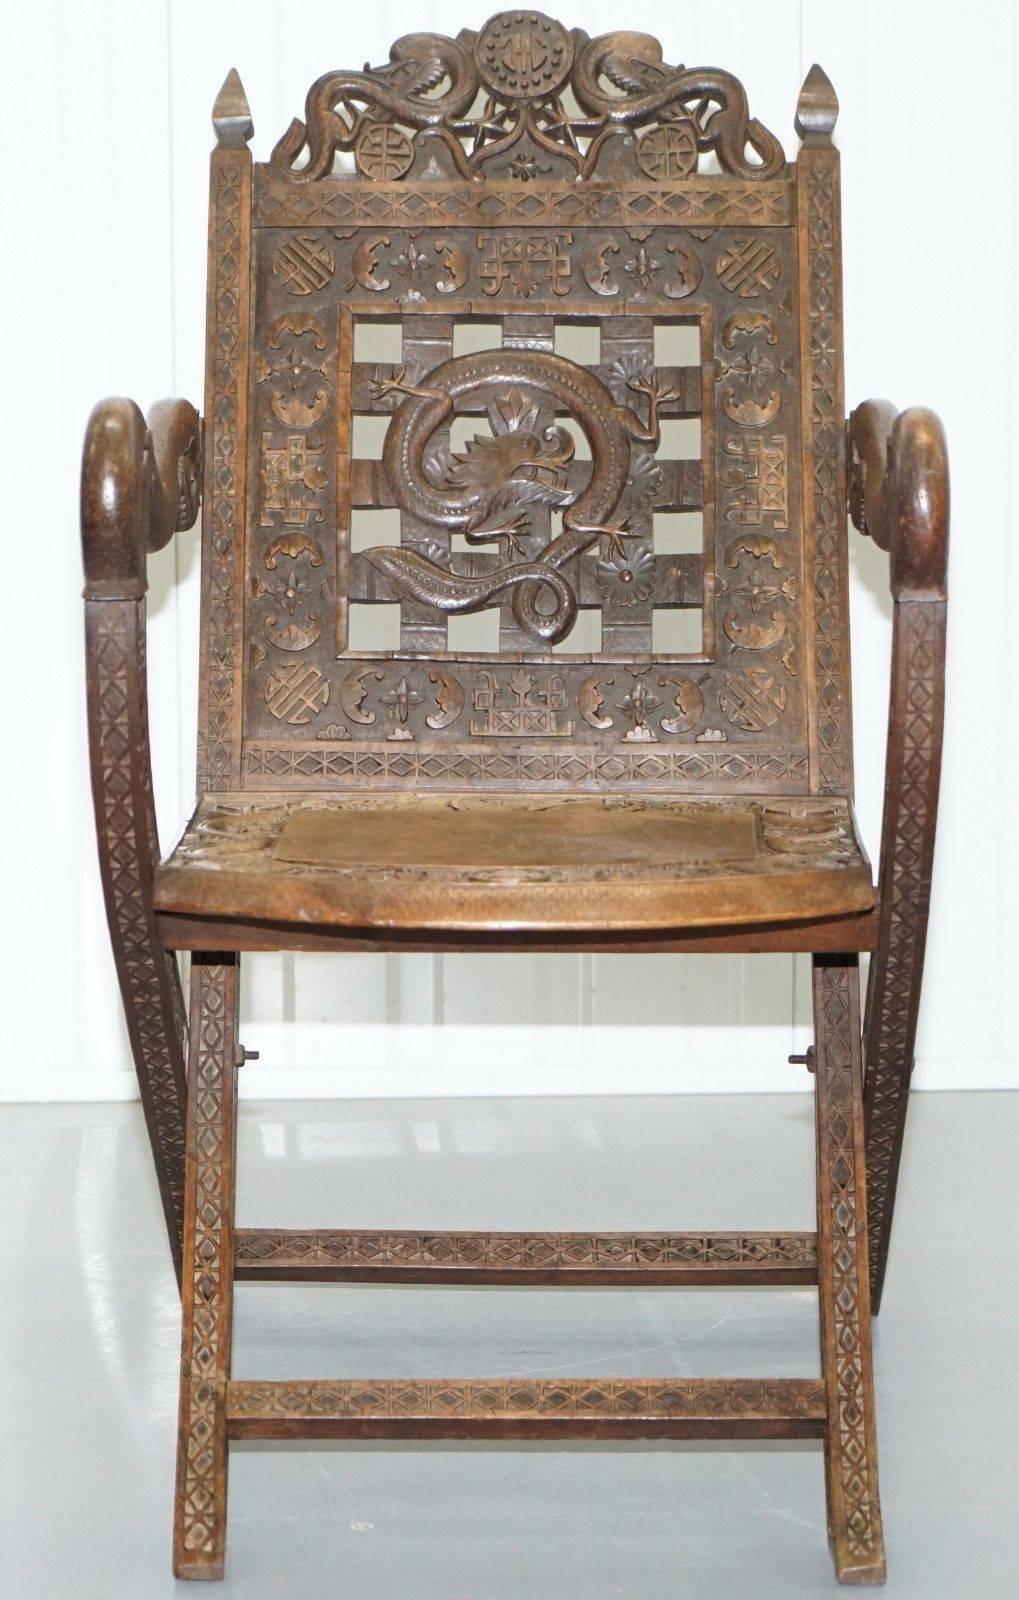 We are delighted to offer for sale one of the finest and most detailed hand-carved wood Chinese armchairs I have ever seen depicting dragons and bats

A rare find, almost every square inch of this chair is hand carved, dating to the early 19th